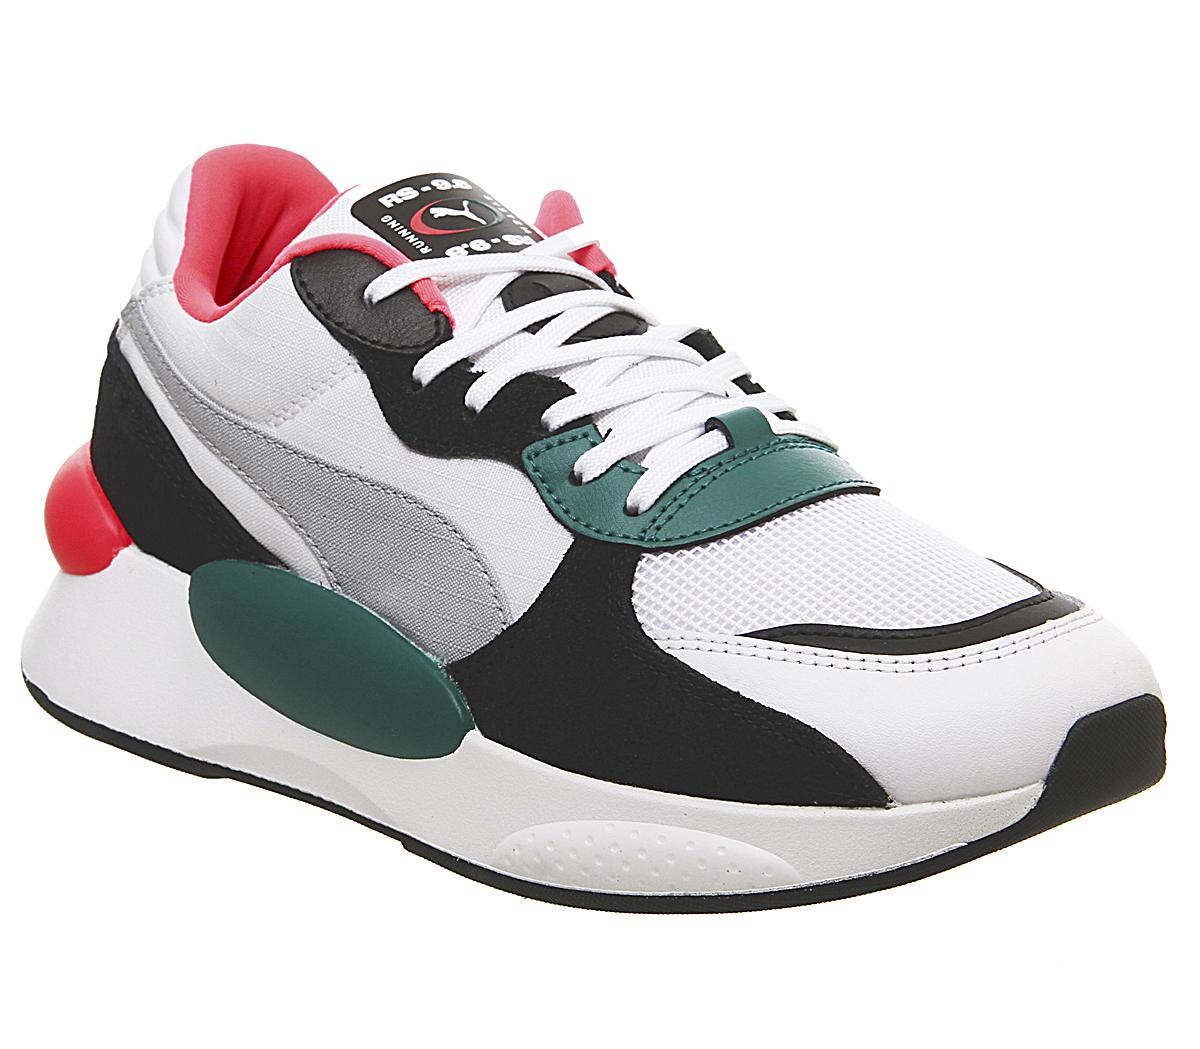 Puma Rs-9.8 Space Trainers Puma White Teal Green - Hers trainers